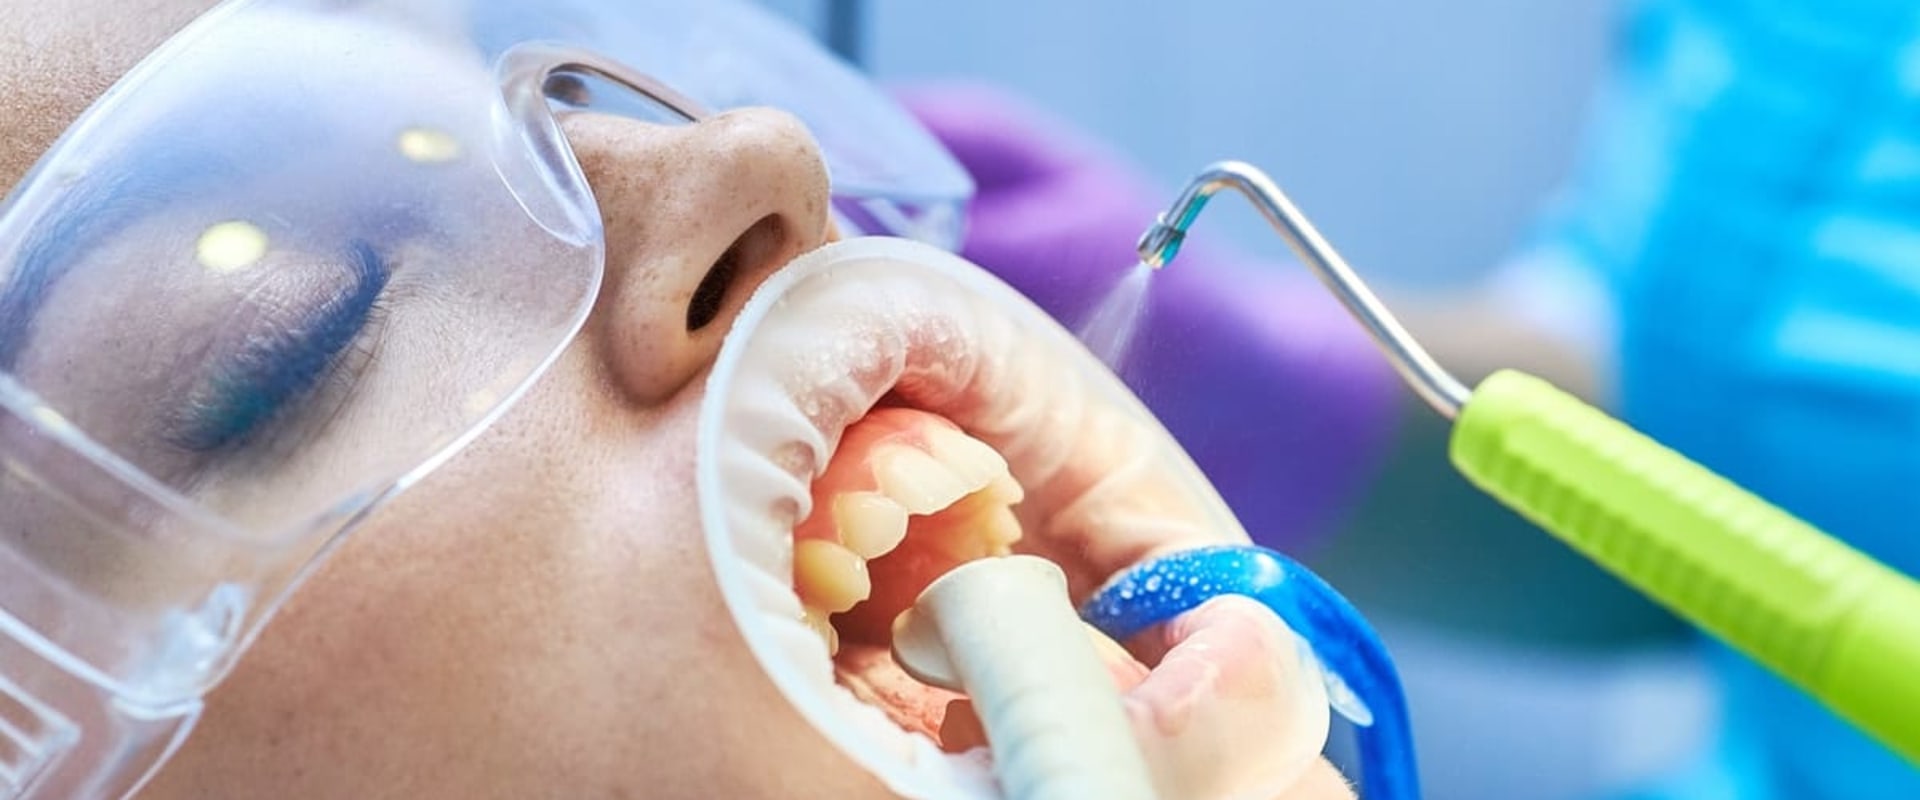 The Advantages of Air Abrasion Devices in Dentistry